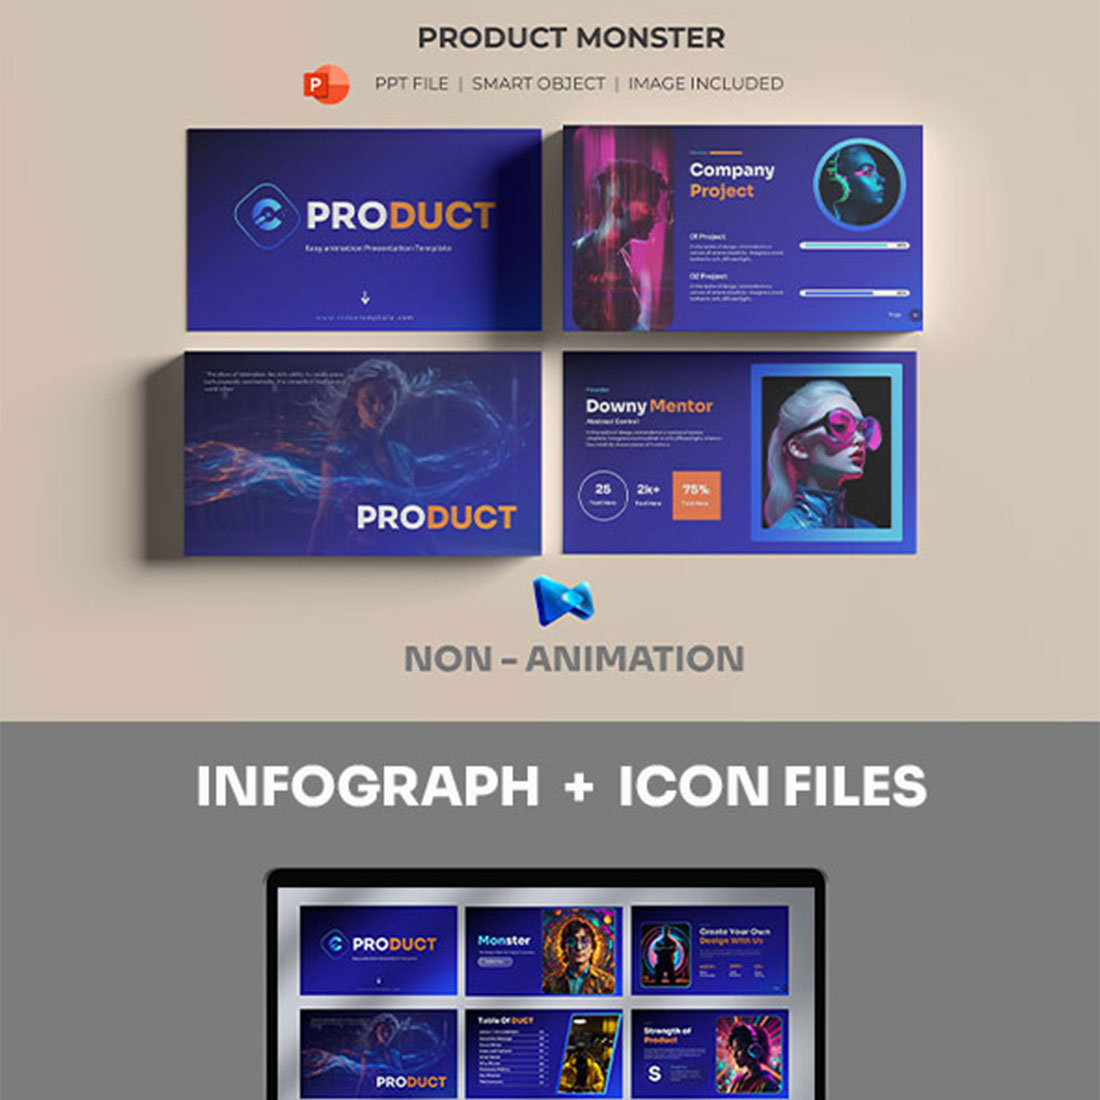 Product Monster PowerPoint Presentation Template cover image.